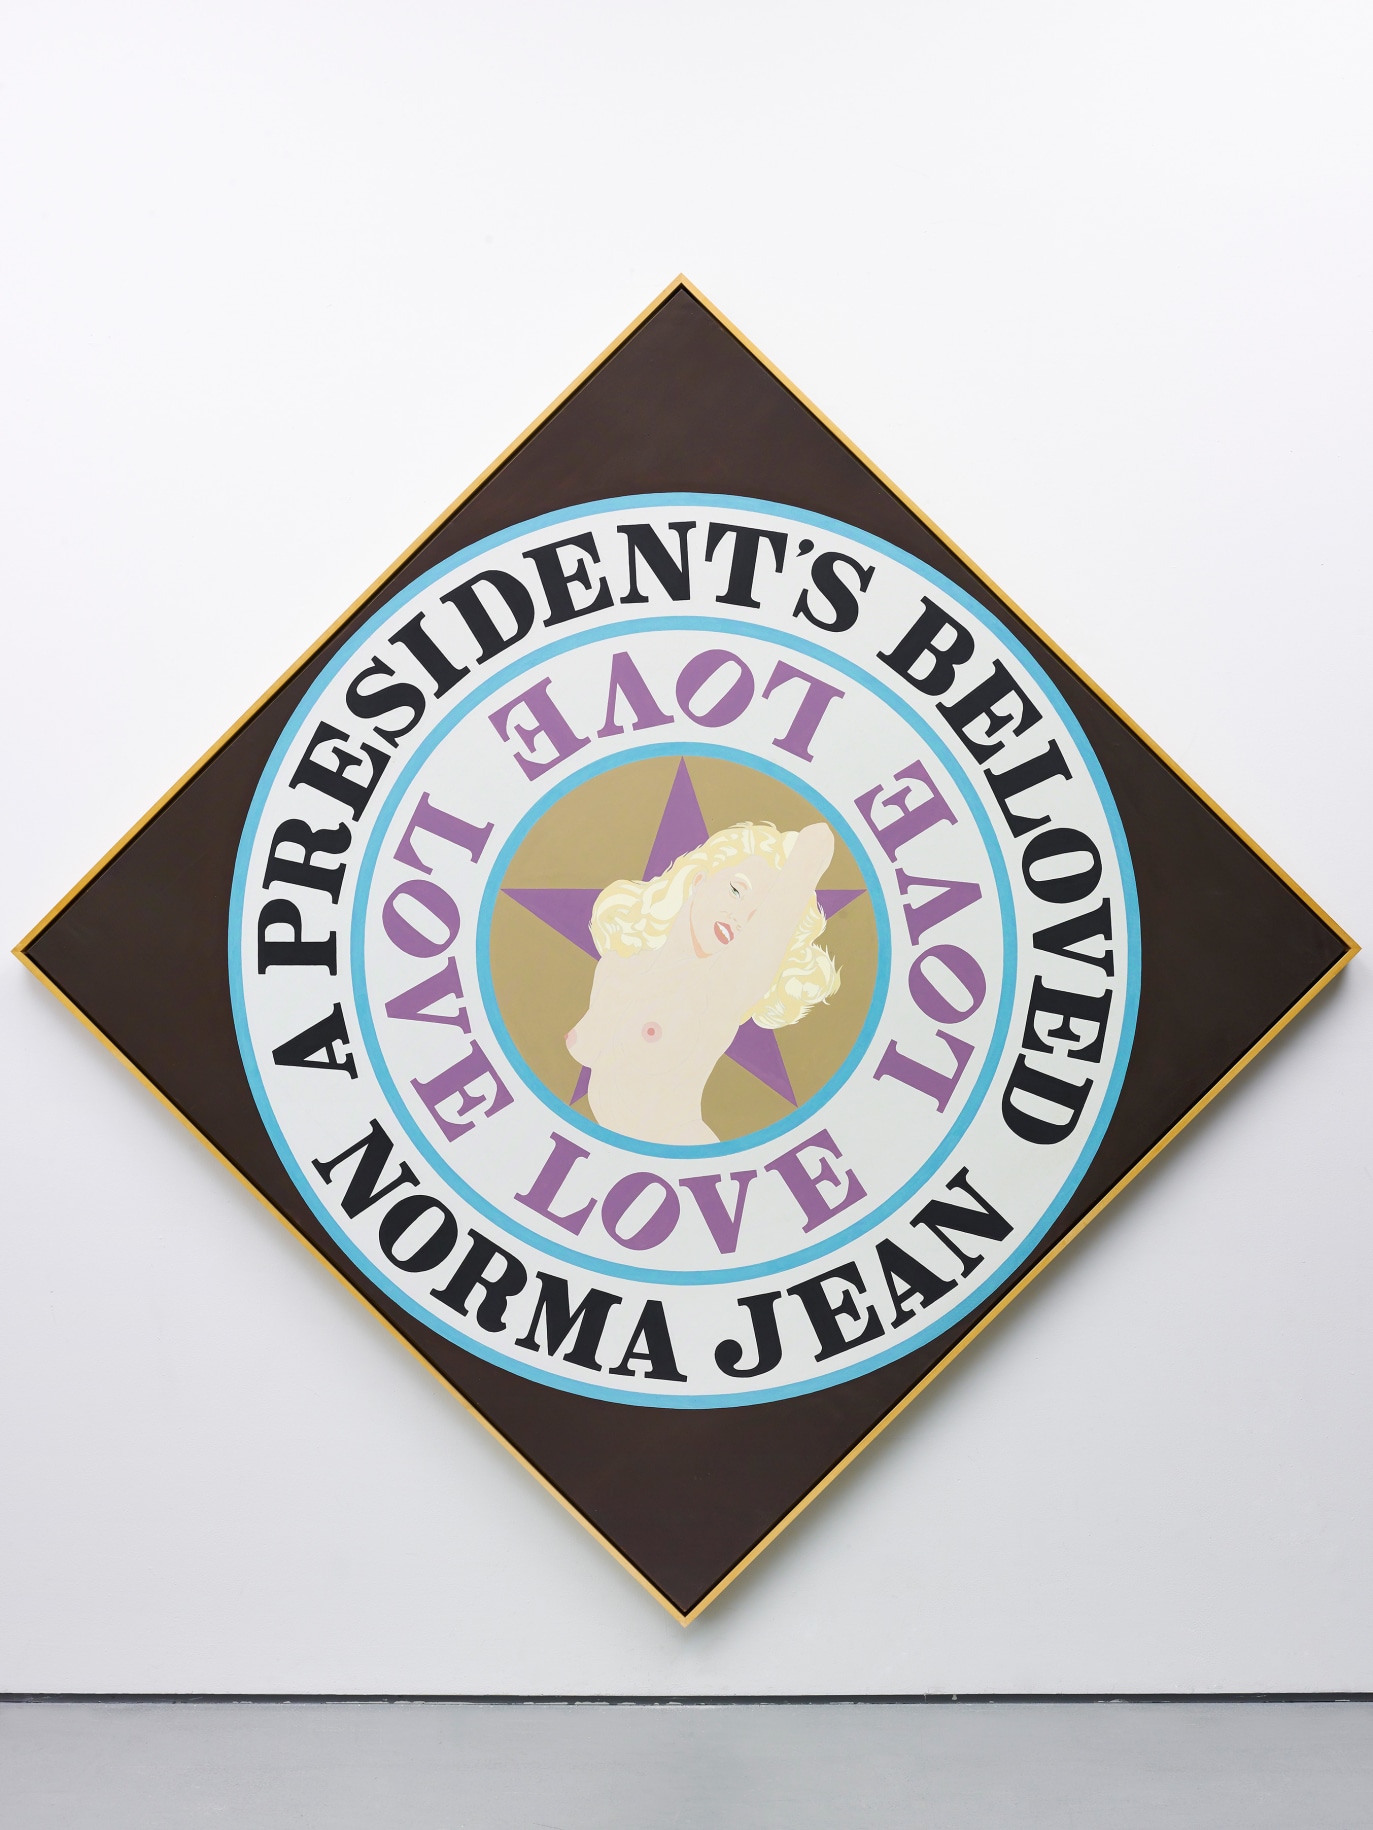 A President's Beloved is a 101 3/4 by 101 3/4 inch diamond shaped canvas with a black ground. A light brown circle surrounded by two white concentric rings with blue outlines dominates the canvas. In the center is an image of a topless Monroe against a purple star. The first ring contains the word Love painted in purple four times. The outer ring contains the text &quot;A President's Beloved Norma Jean&quot; painted in black.